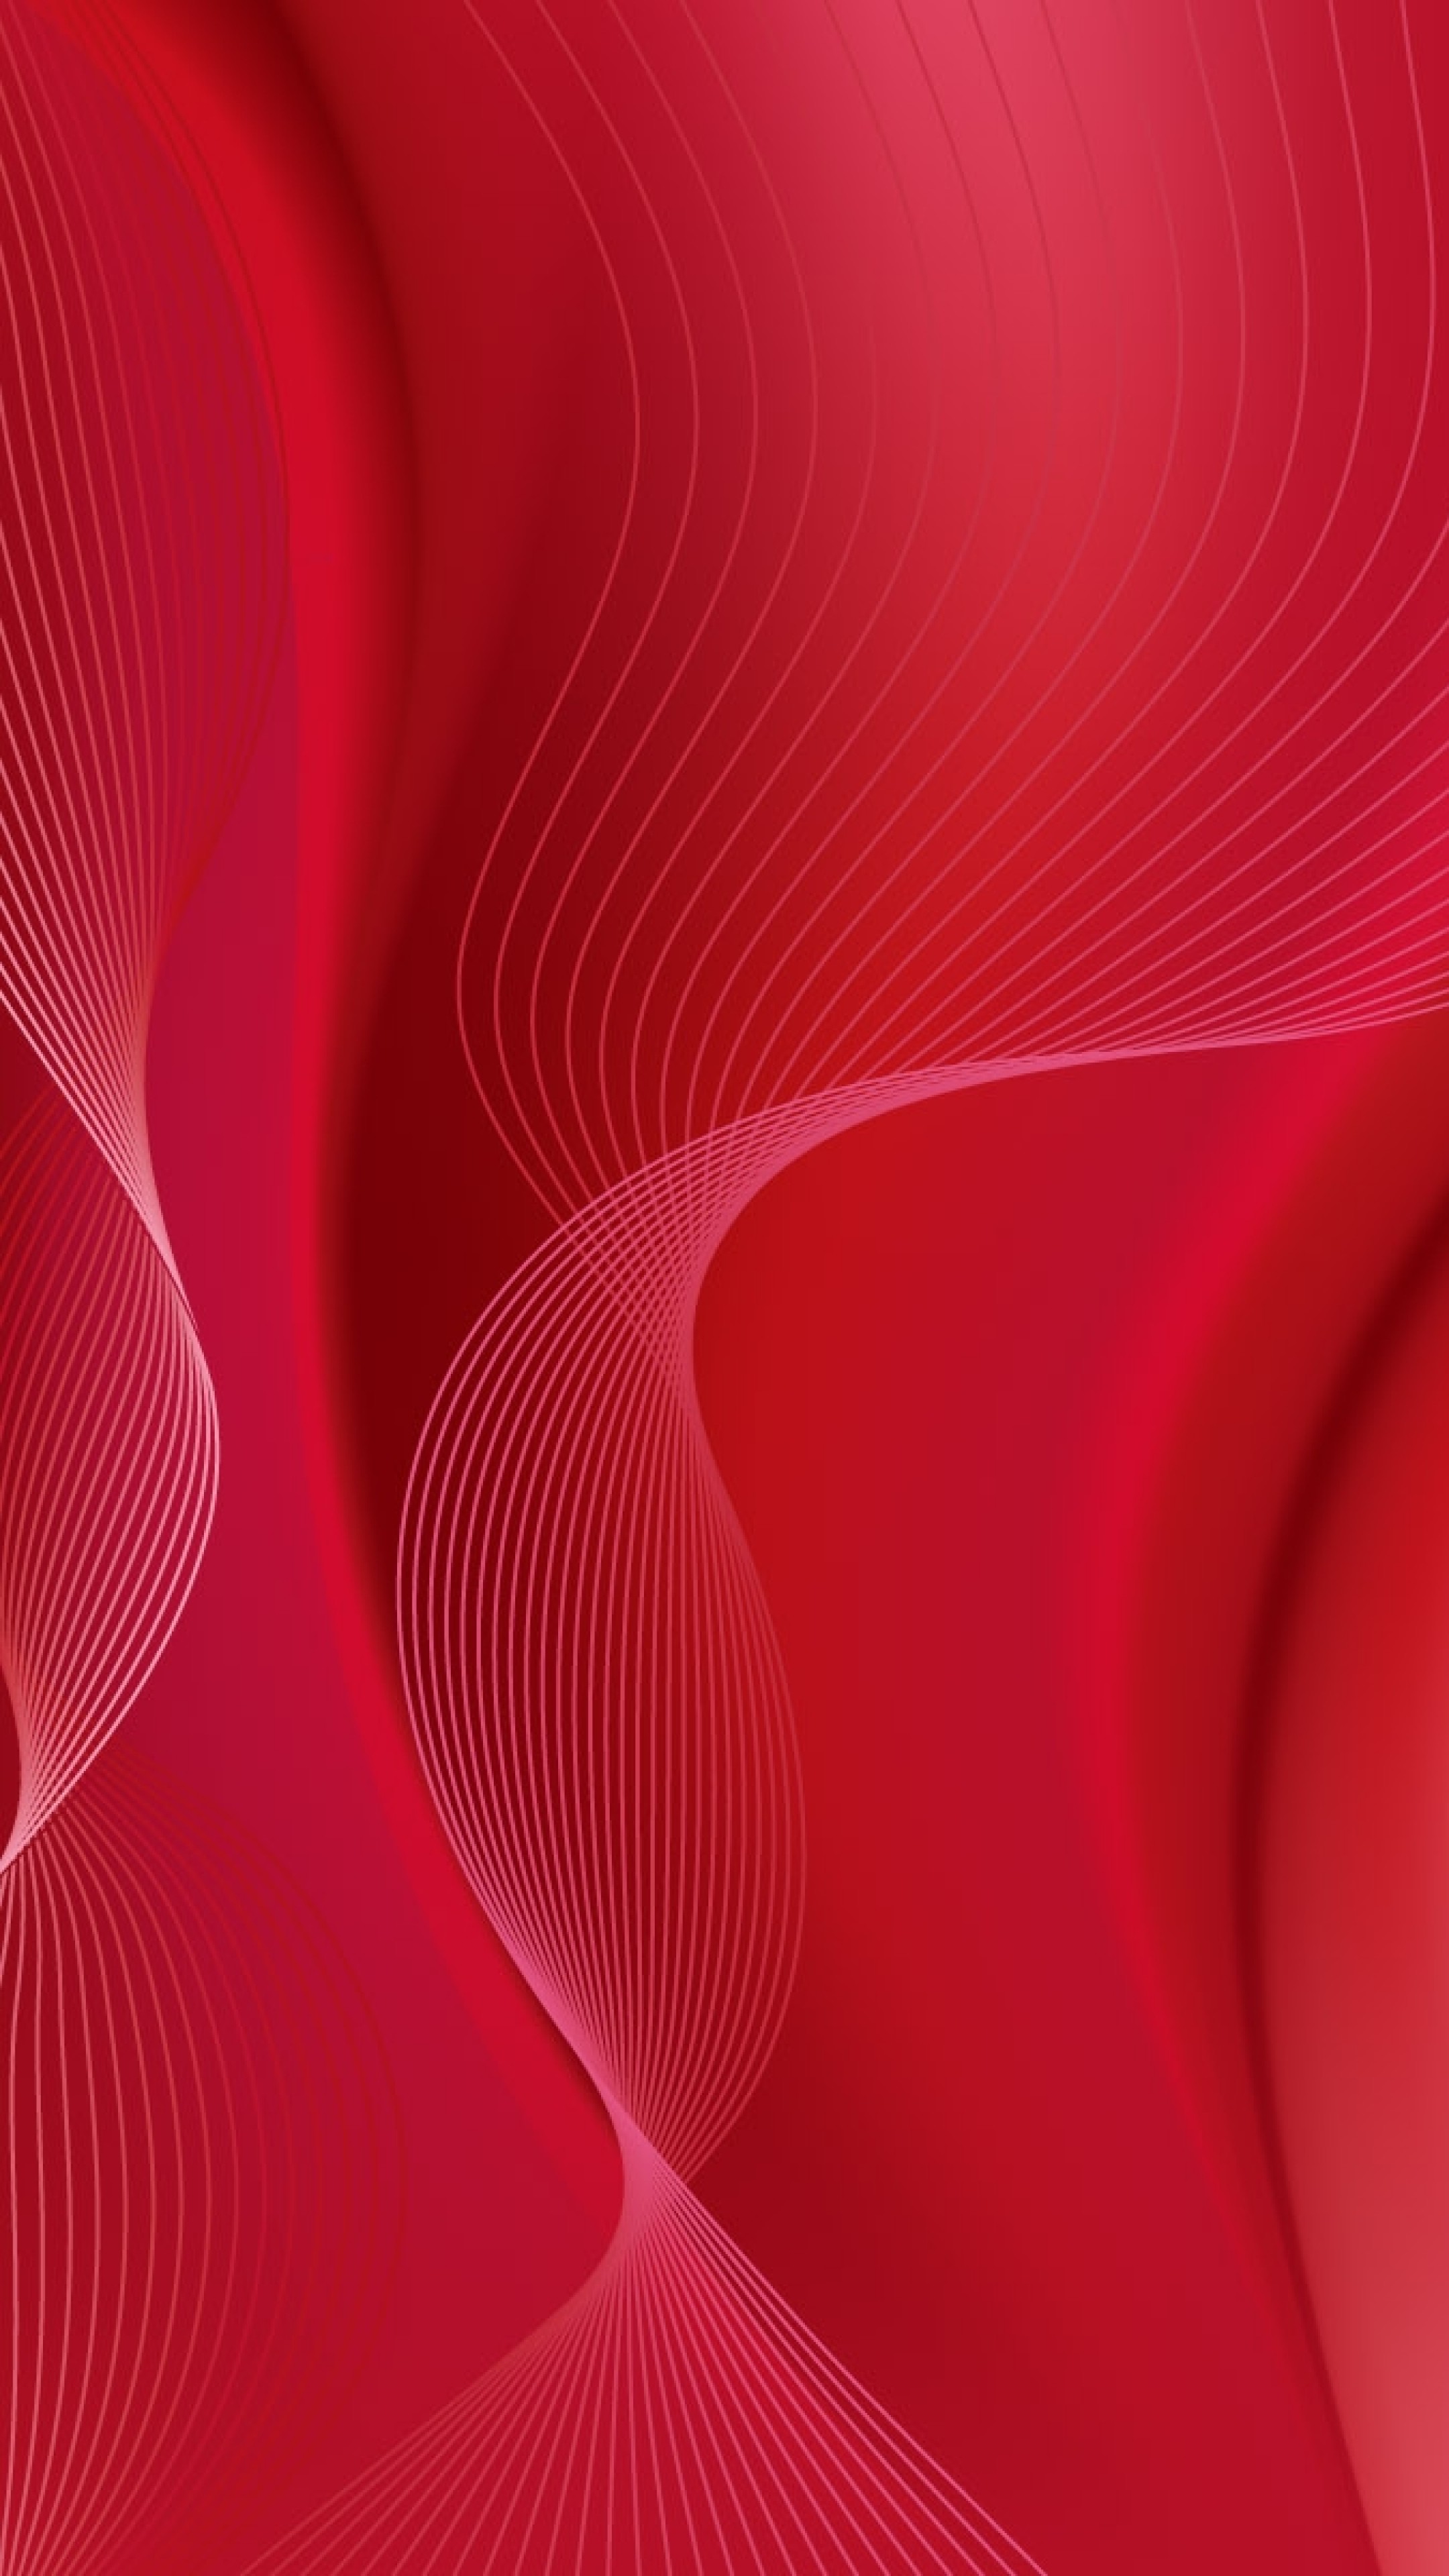 Wallpaper lines, red, background, wave